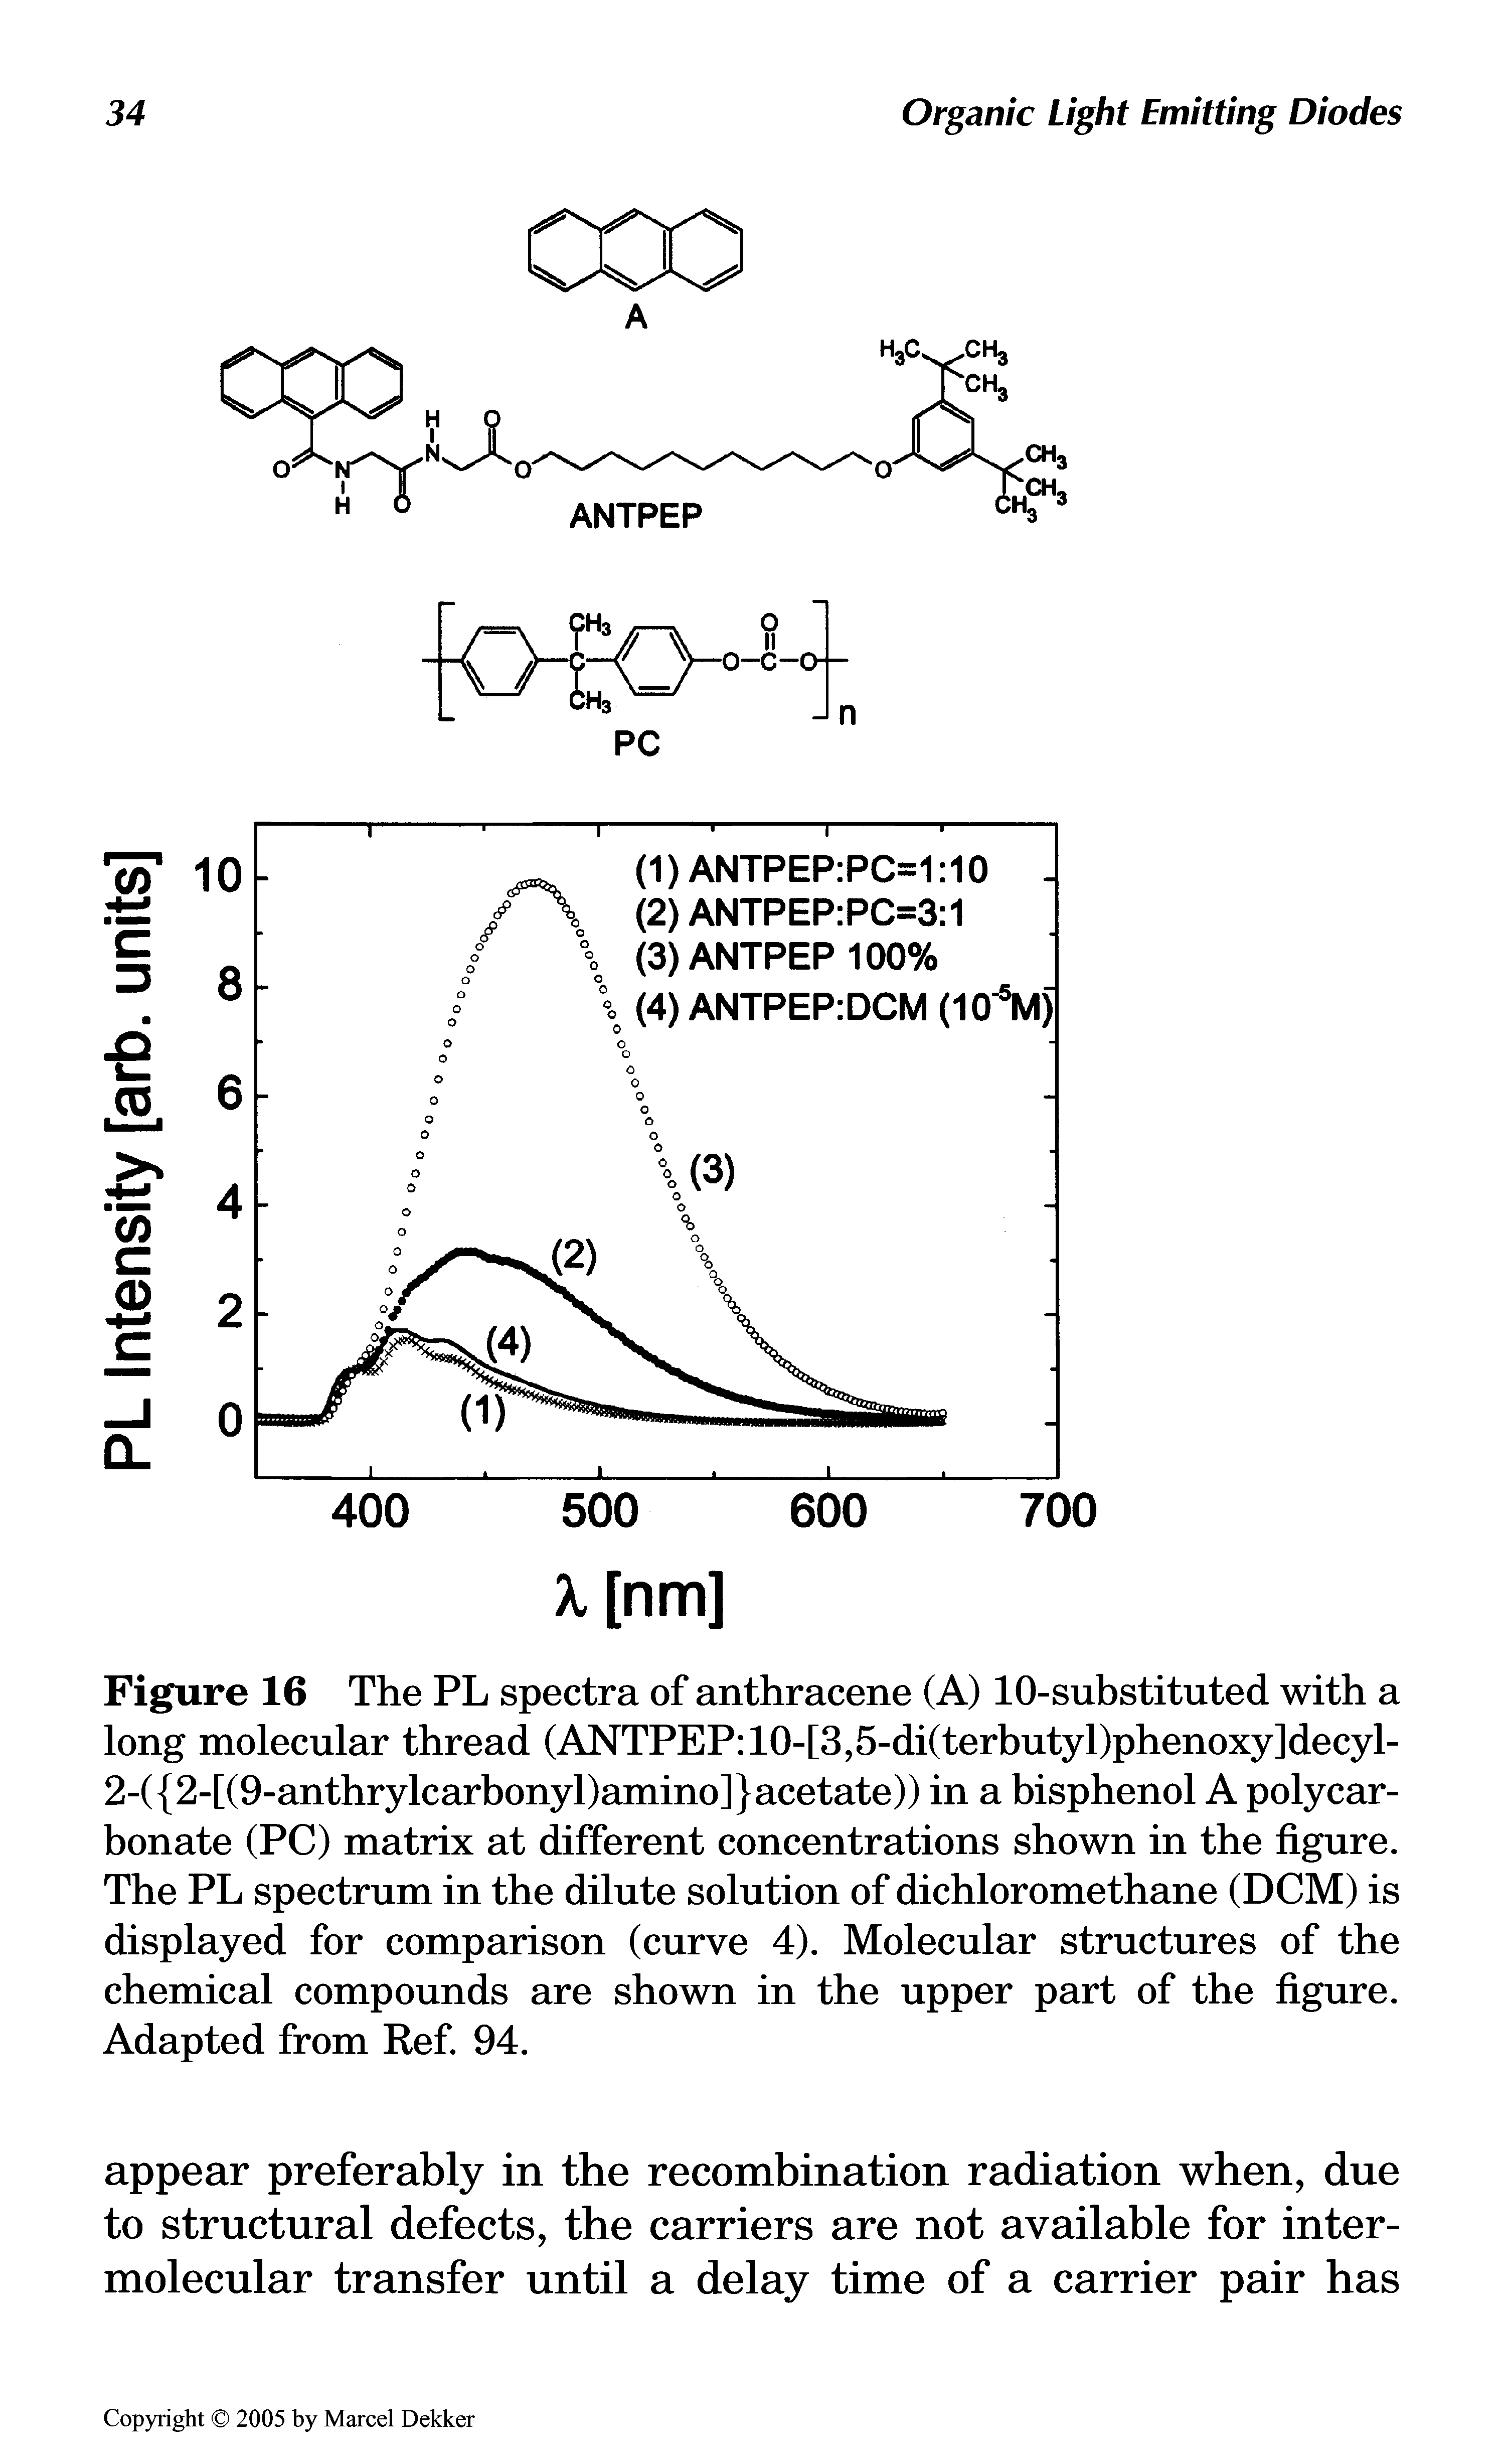 Figure 16 The PL spectra of anthracene (A) 10-substituted with a long molecular thread (ANTPEP 10-[3,5-di(terbutyl)phenoxy]decyl-2-( 2-[(9-anthrylcarbonyl)amino] acetate)) in a bisphenol A polycarbonate (PC) matrix at different concentrations shown in the figure. The PL spectrum in the dilute solution of dichloromethane (DCM) is displayed for comparison (curve 4). Molecular structures of the chemical compounds are shown in the upper part of the figure. Adapted from Ref. 94.